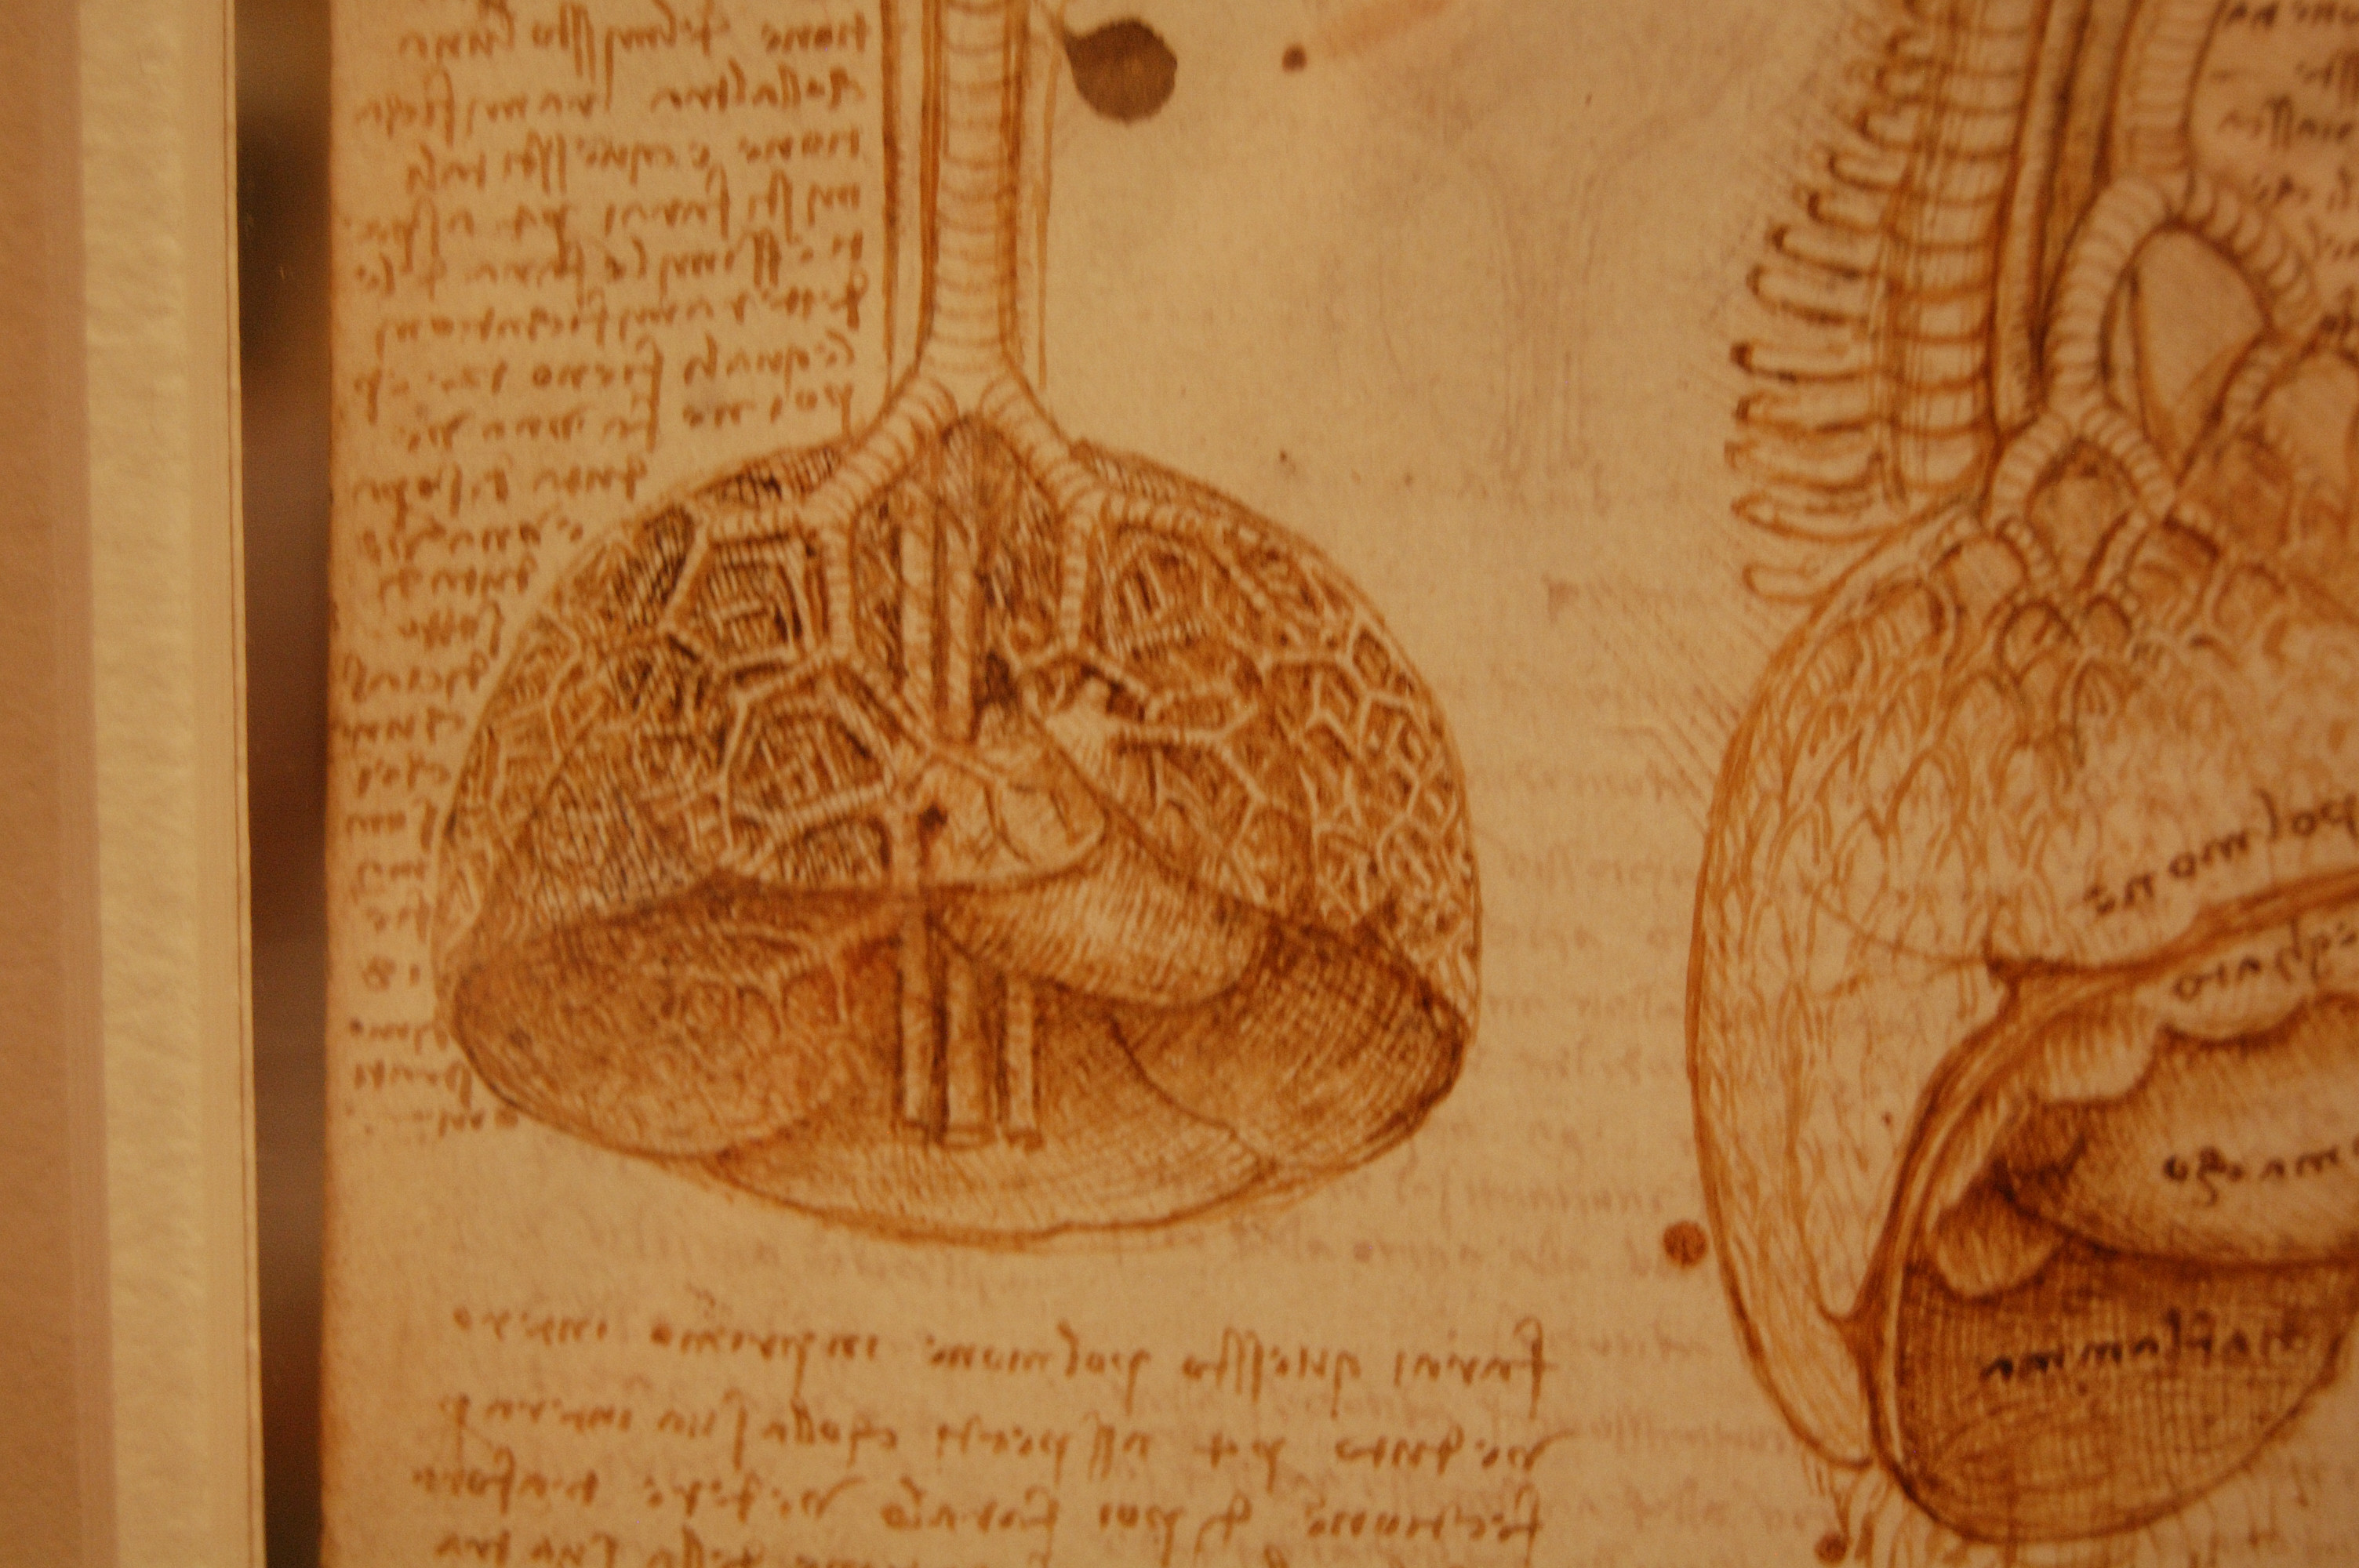 3008x2000 Images of da vinci anatomy wallpaper sc da vincis anatomical drawings by  roony of the wood